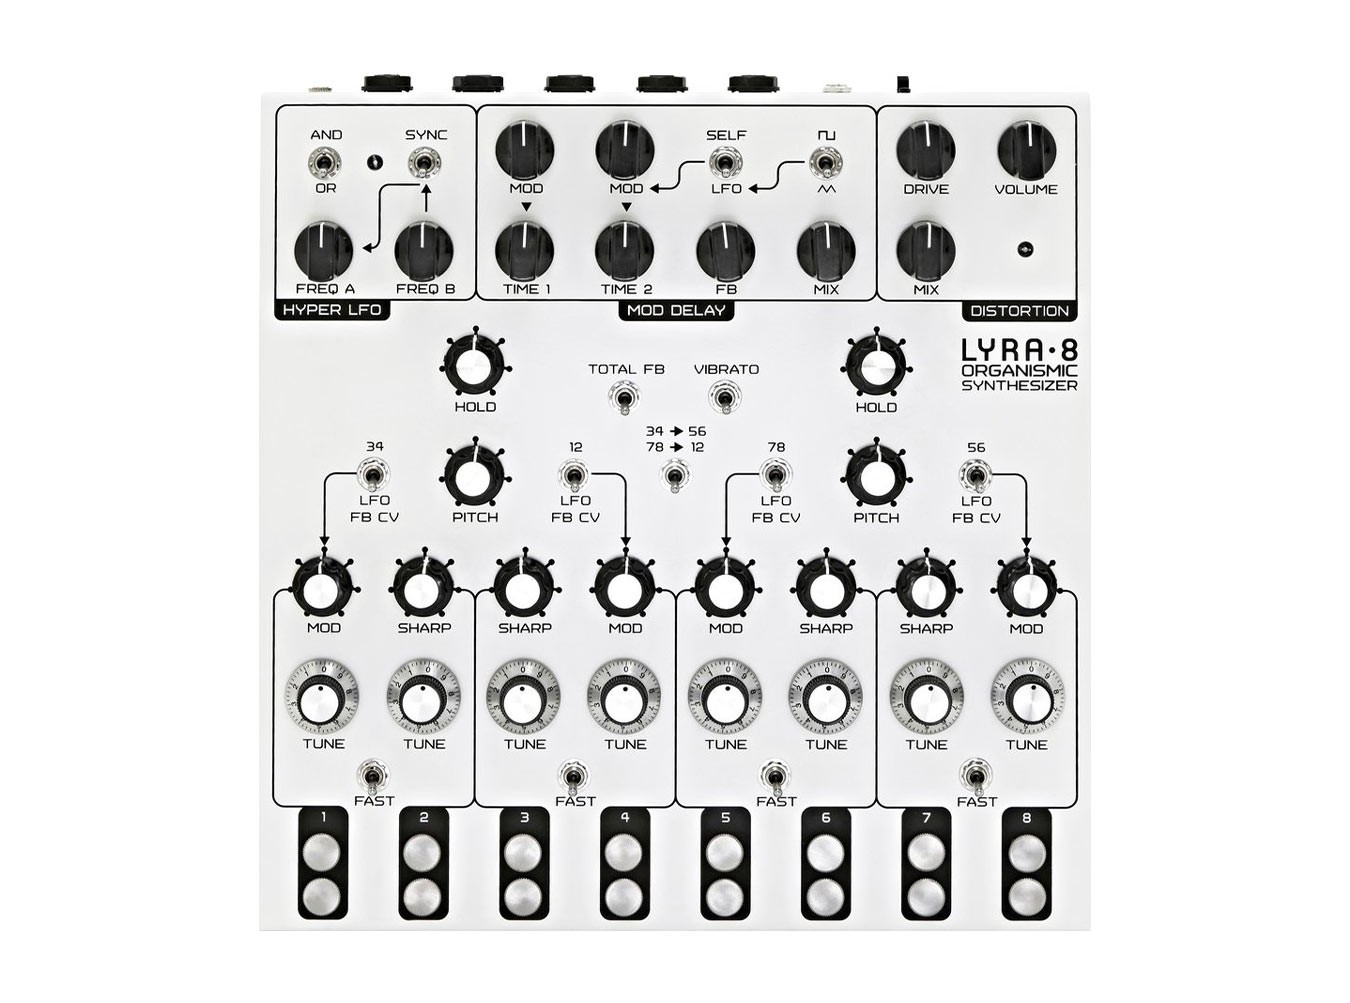 LYRA-8 Organismic Synth (for soundscapes, FXs, pads, complex